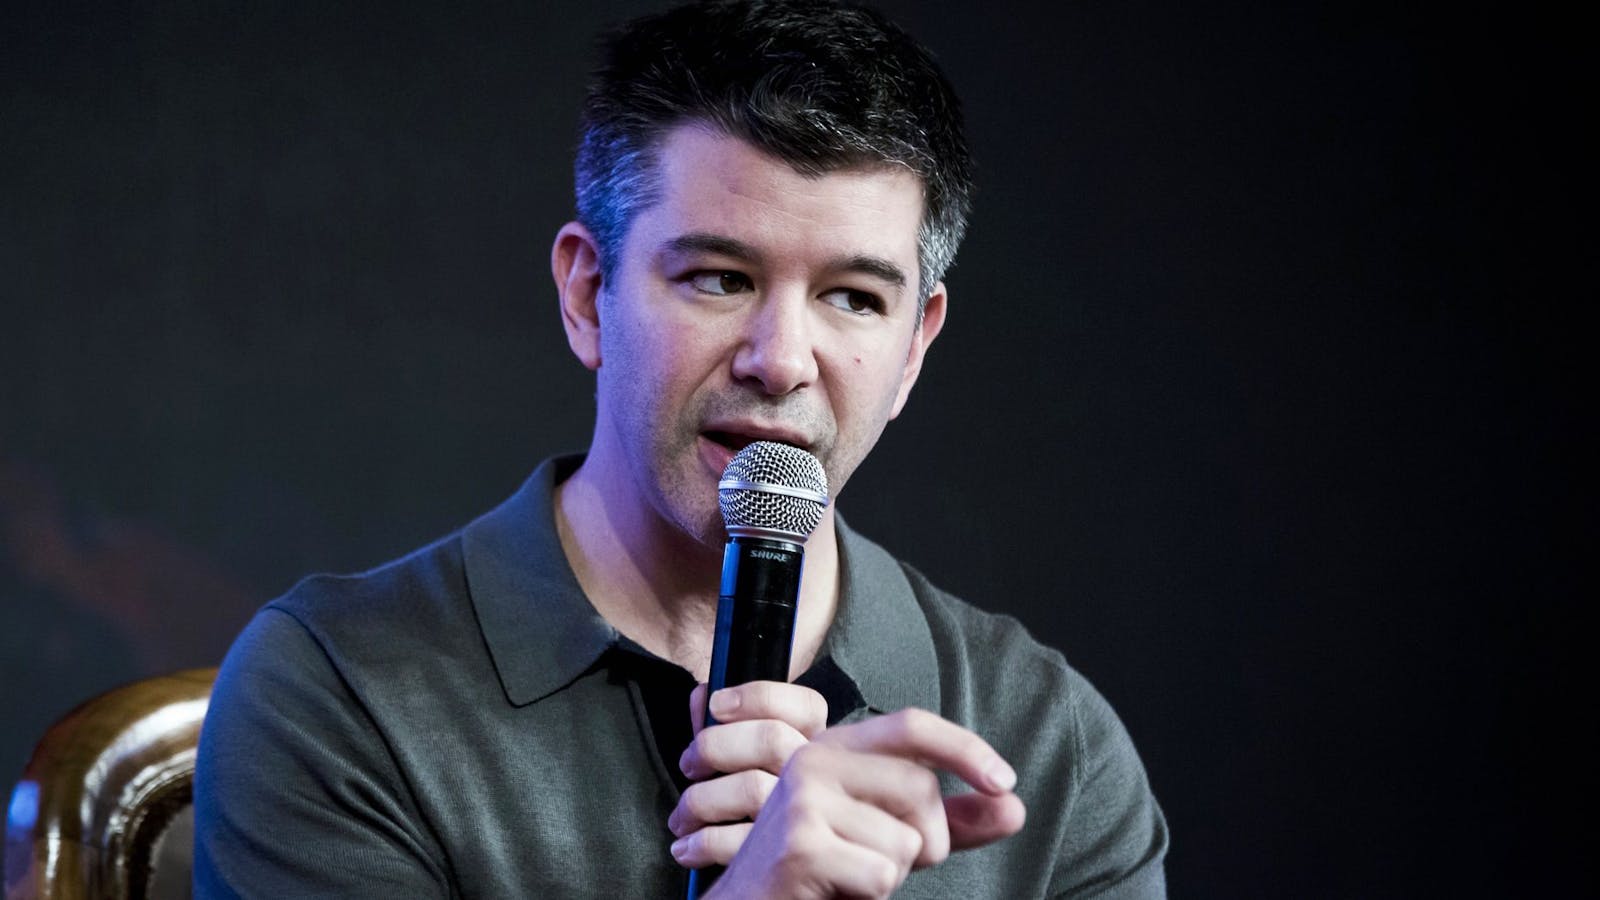 Uber CEO Travis Kalanick. Photo: Bloomberg. Graphic by Mike Sullivan and Myk Klemme.